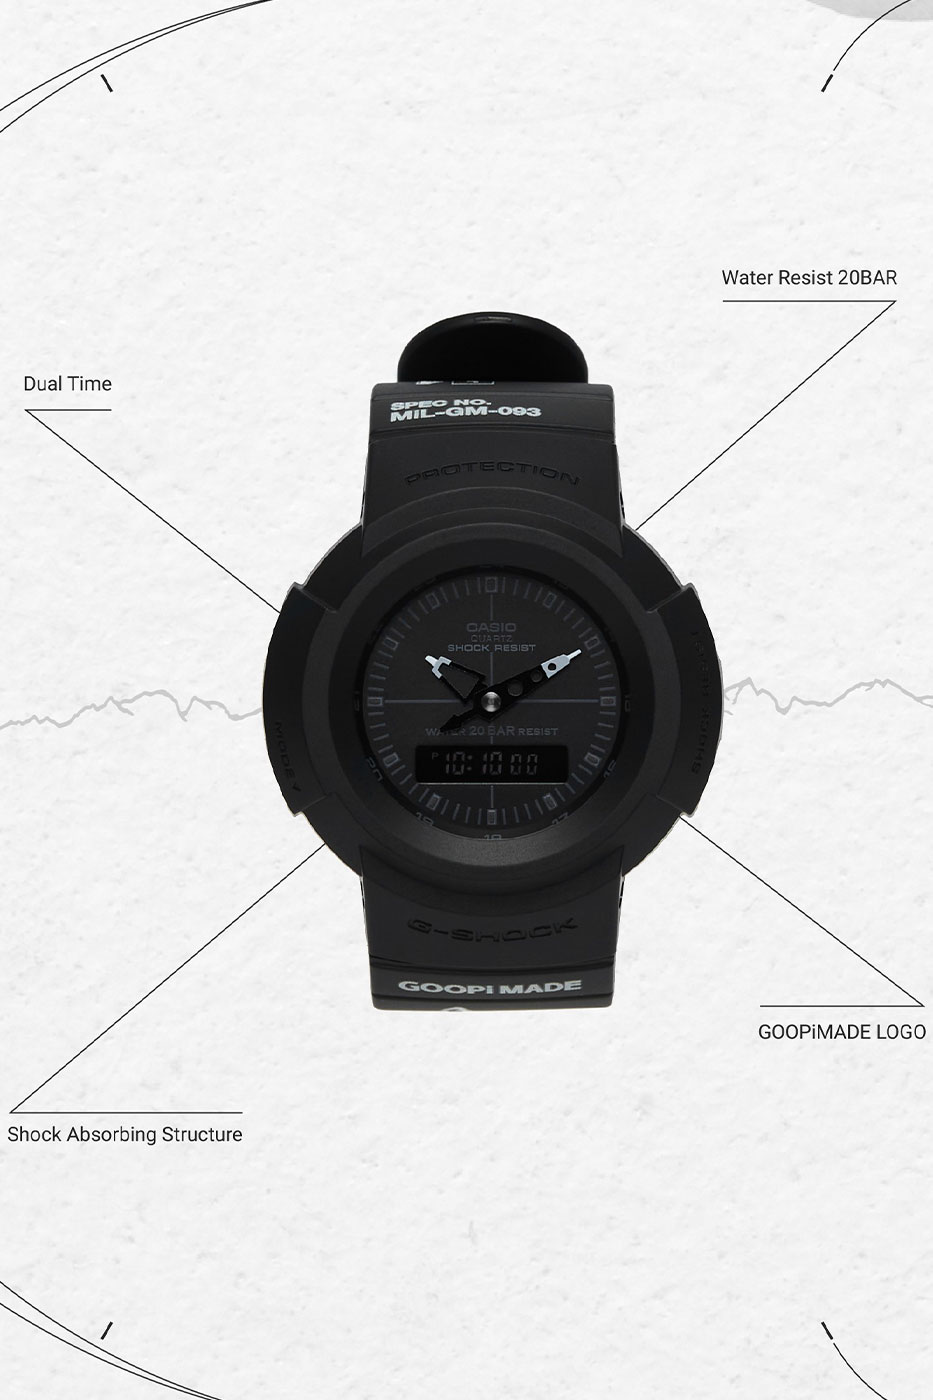 goopimade-gshock-without-apex